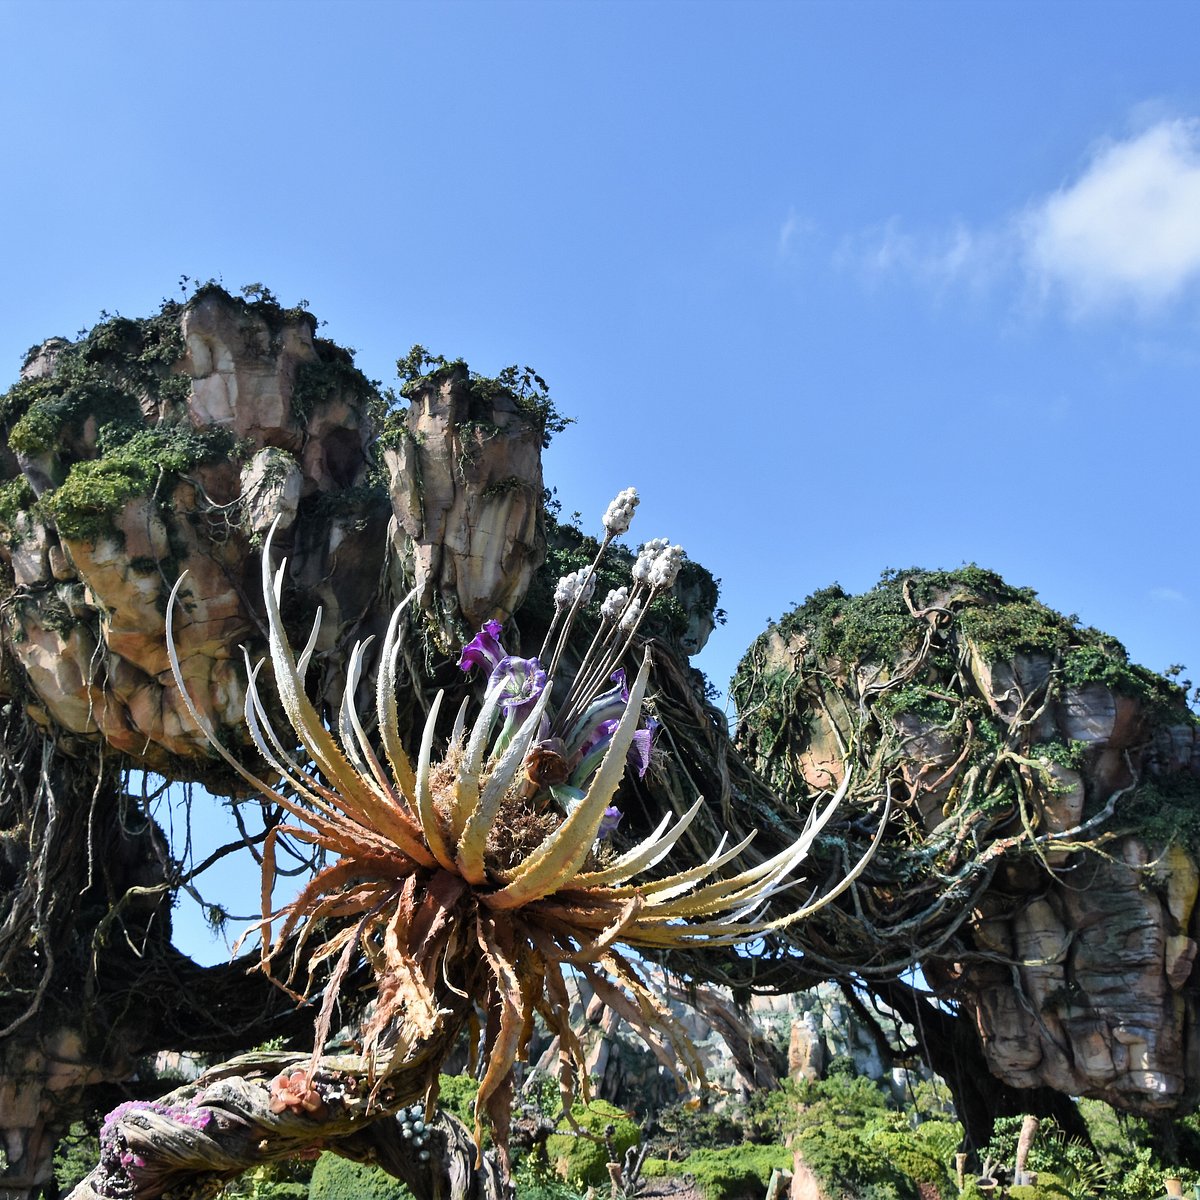 PANDORA – THE WORLD OF AVATAR (Orlando) - All You Need to Know BEFORE You Go